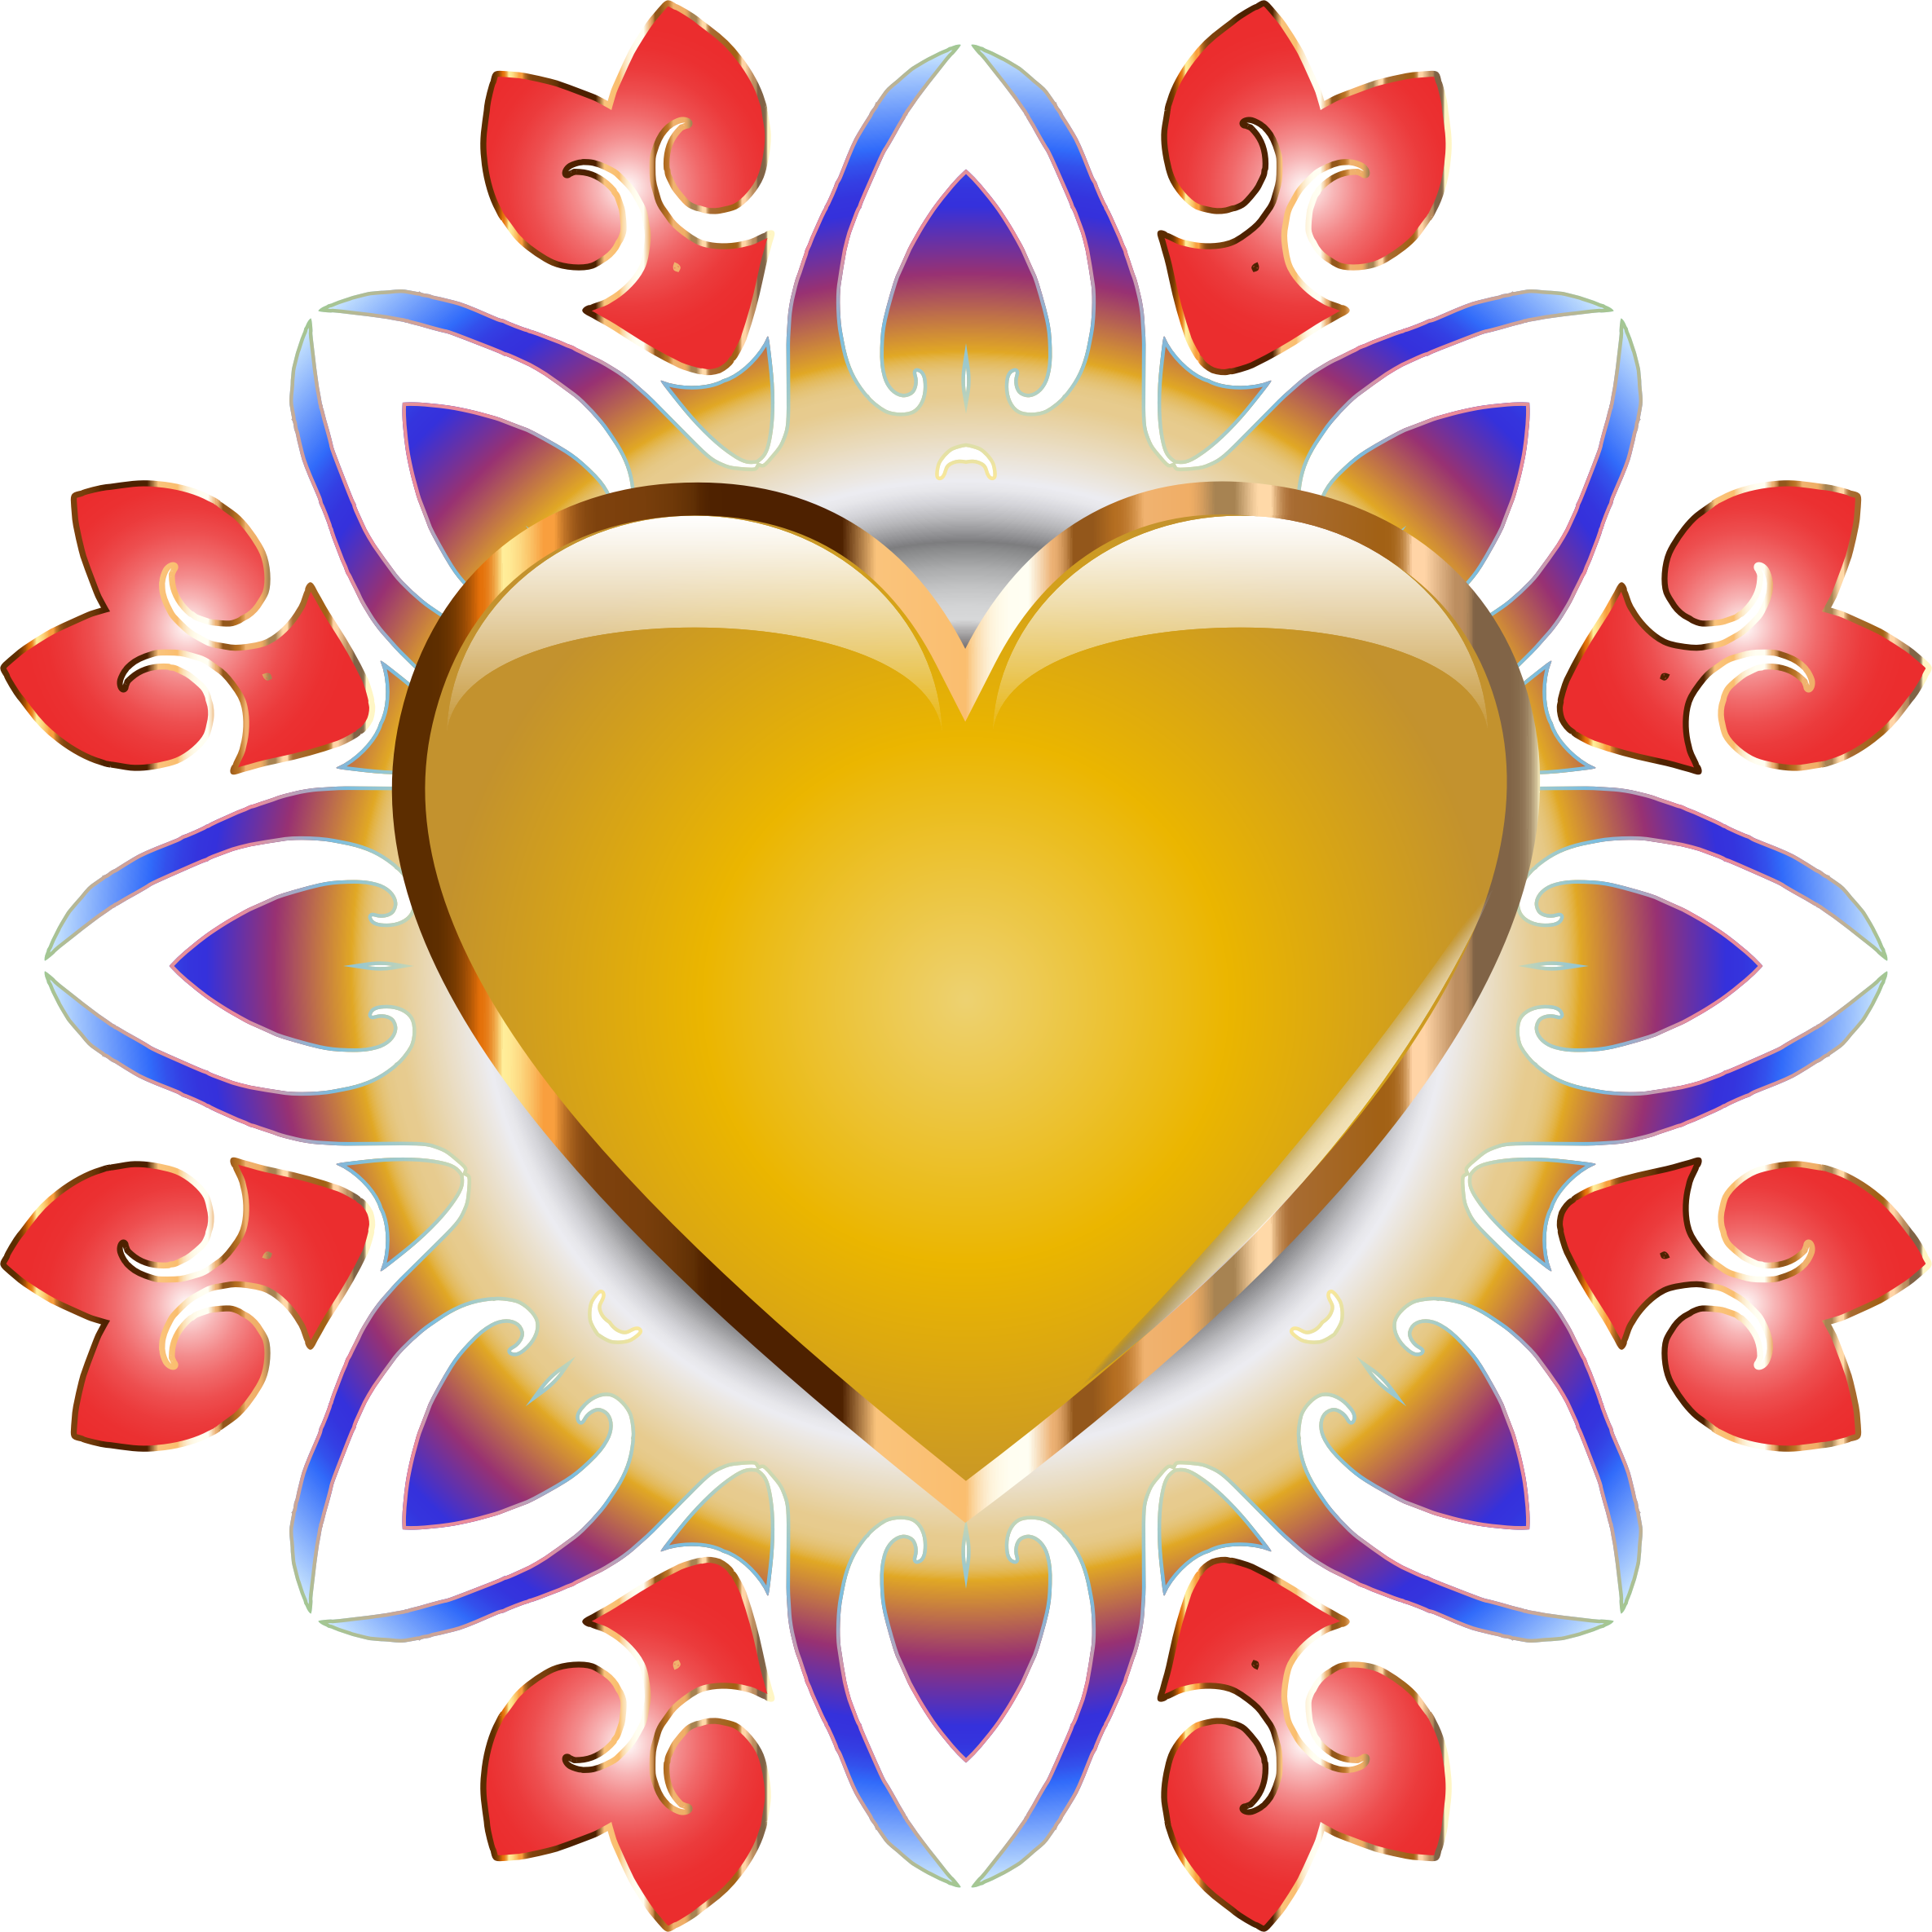 Clipart Abstract Heart Design No Background Rh Openclipart - Portable Network Graphics (2370x2370)